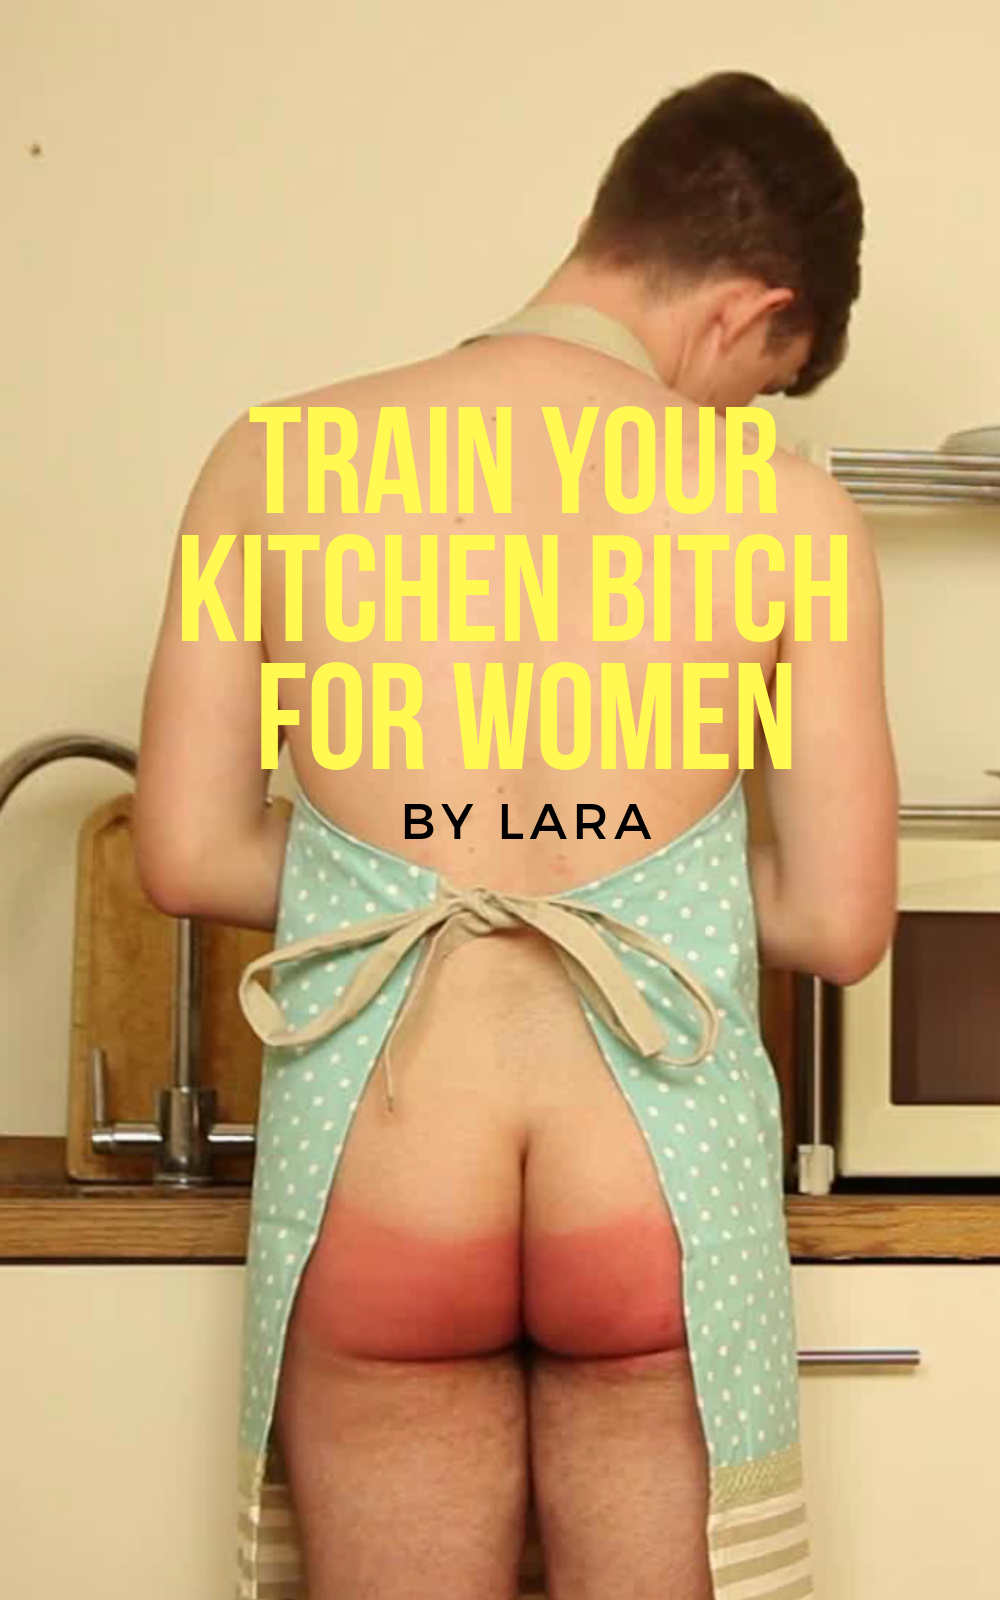 Train Your Kitchen Bitch image pic